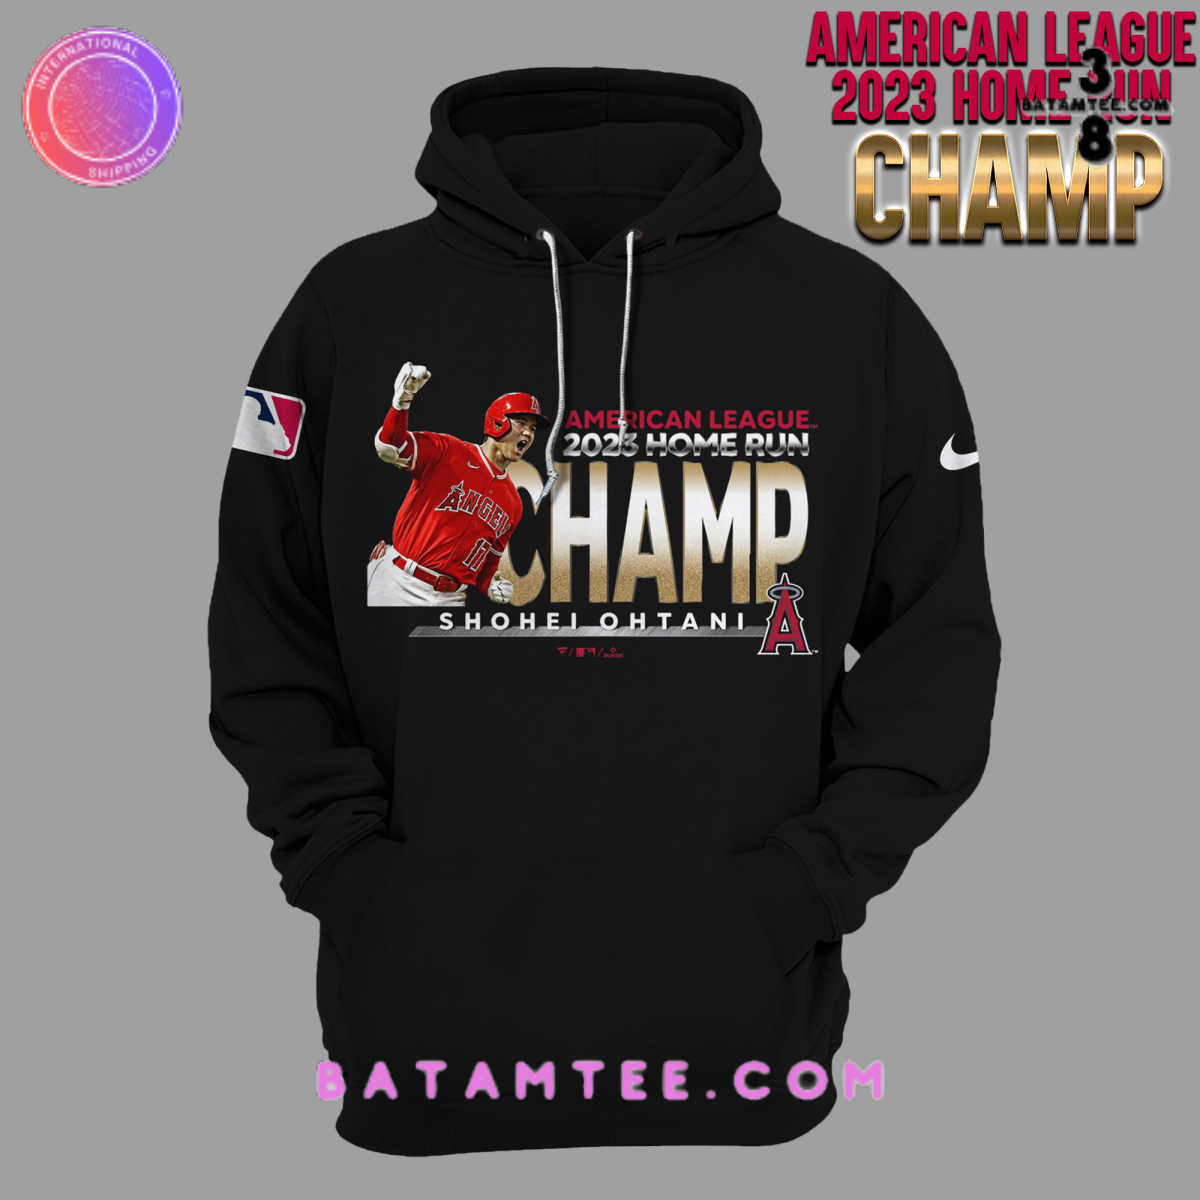 Los Angeles Angels Shohei Ohtani 2023 Home Run Champ Black Hoodie's Overview - Batamtee Shop - Threads & Totes: Your Style Destination